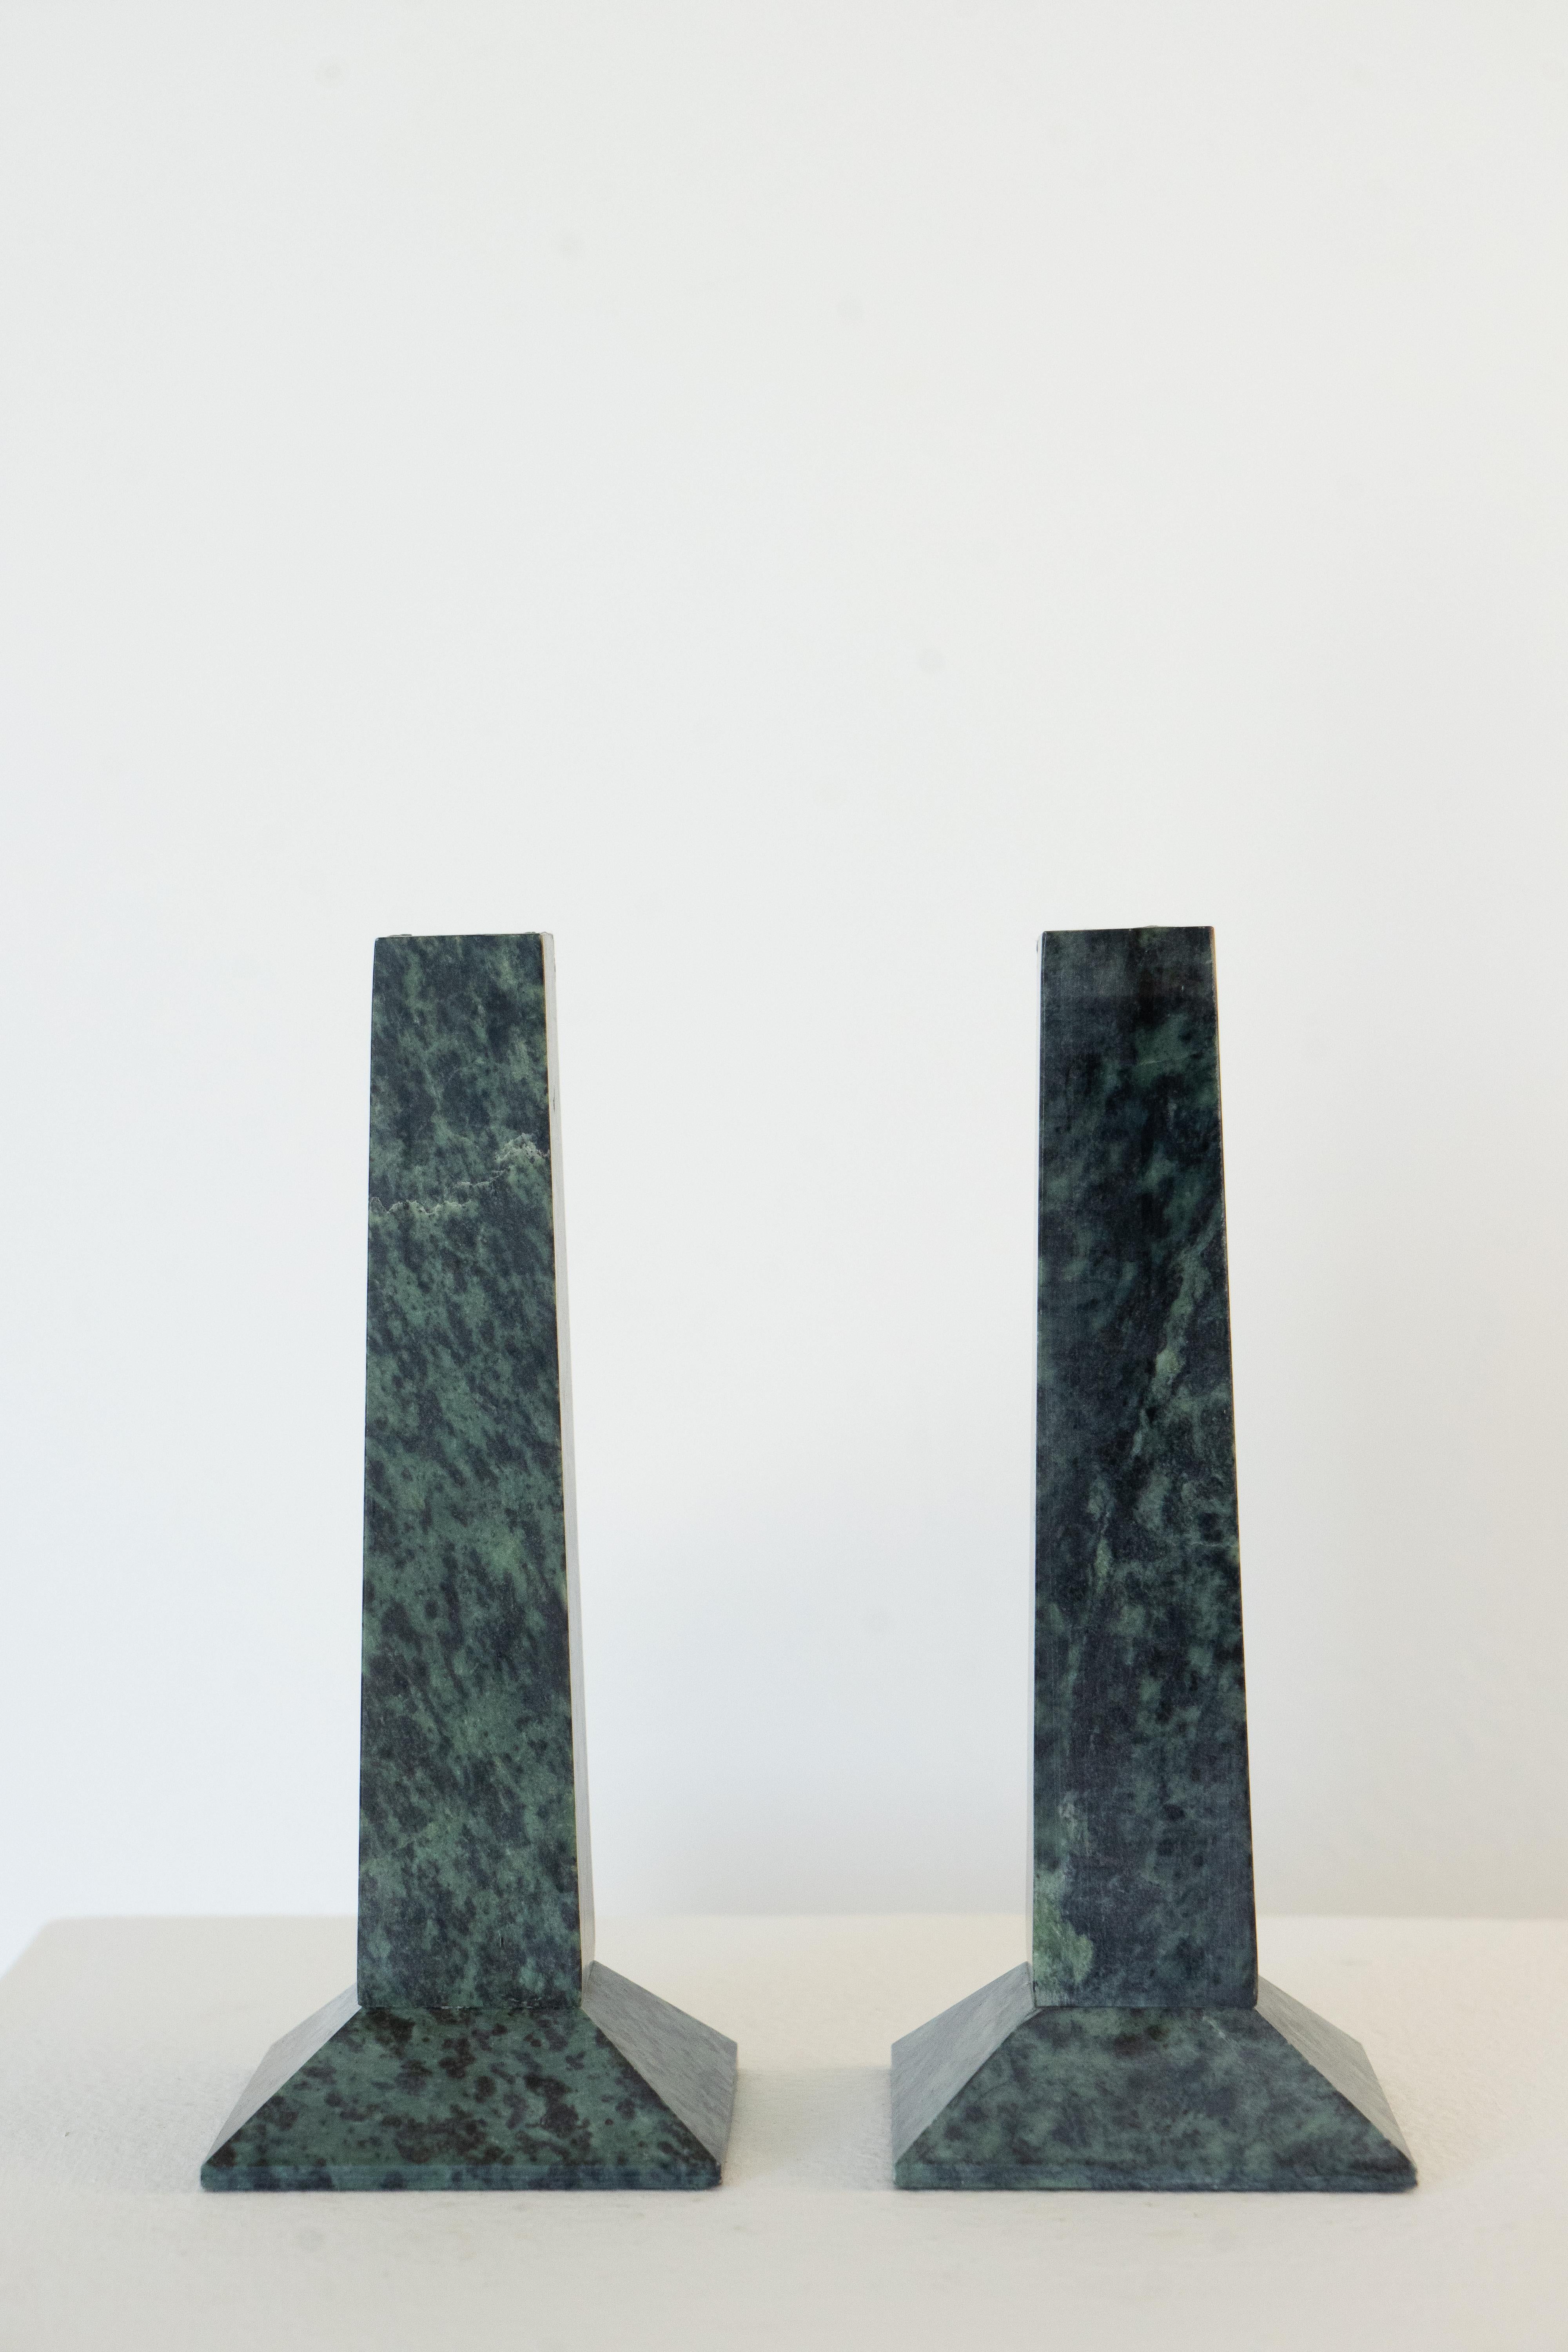 Italian Green Marble Architectural Candle Holders Circa 1980s For Sale 3